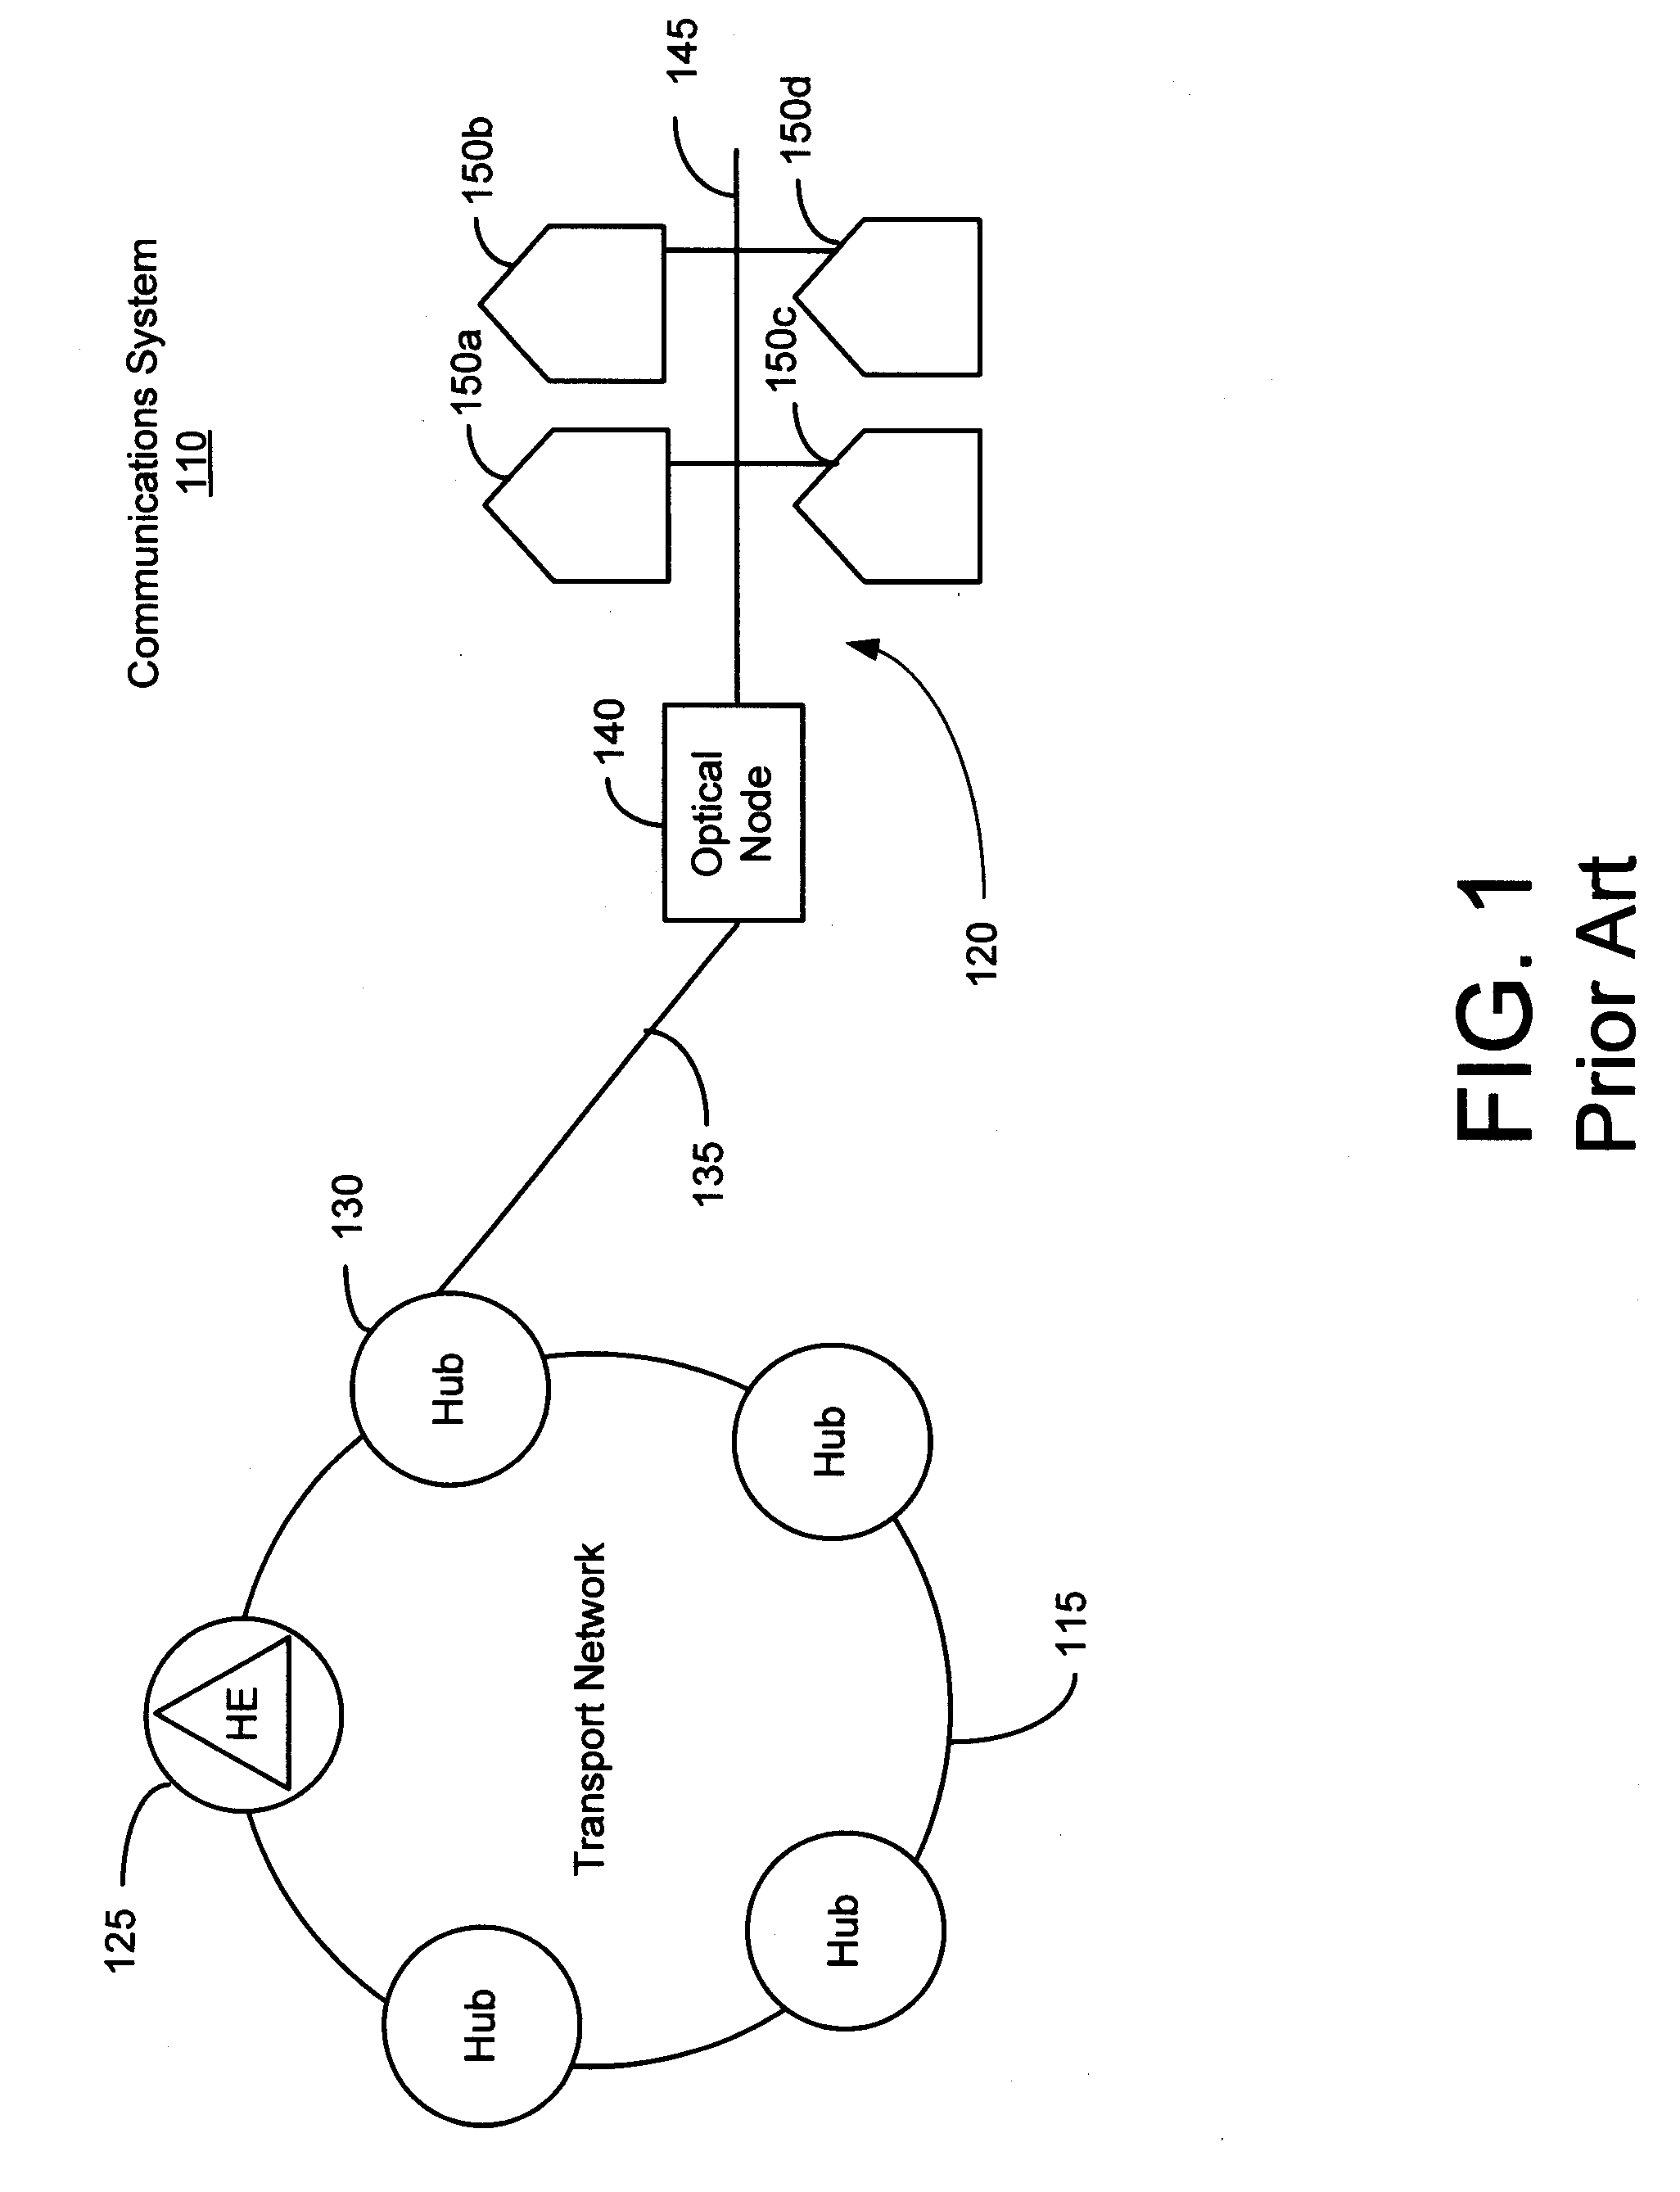 Controlled cryptoperiod timing to reduce decoder processing load